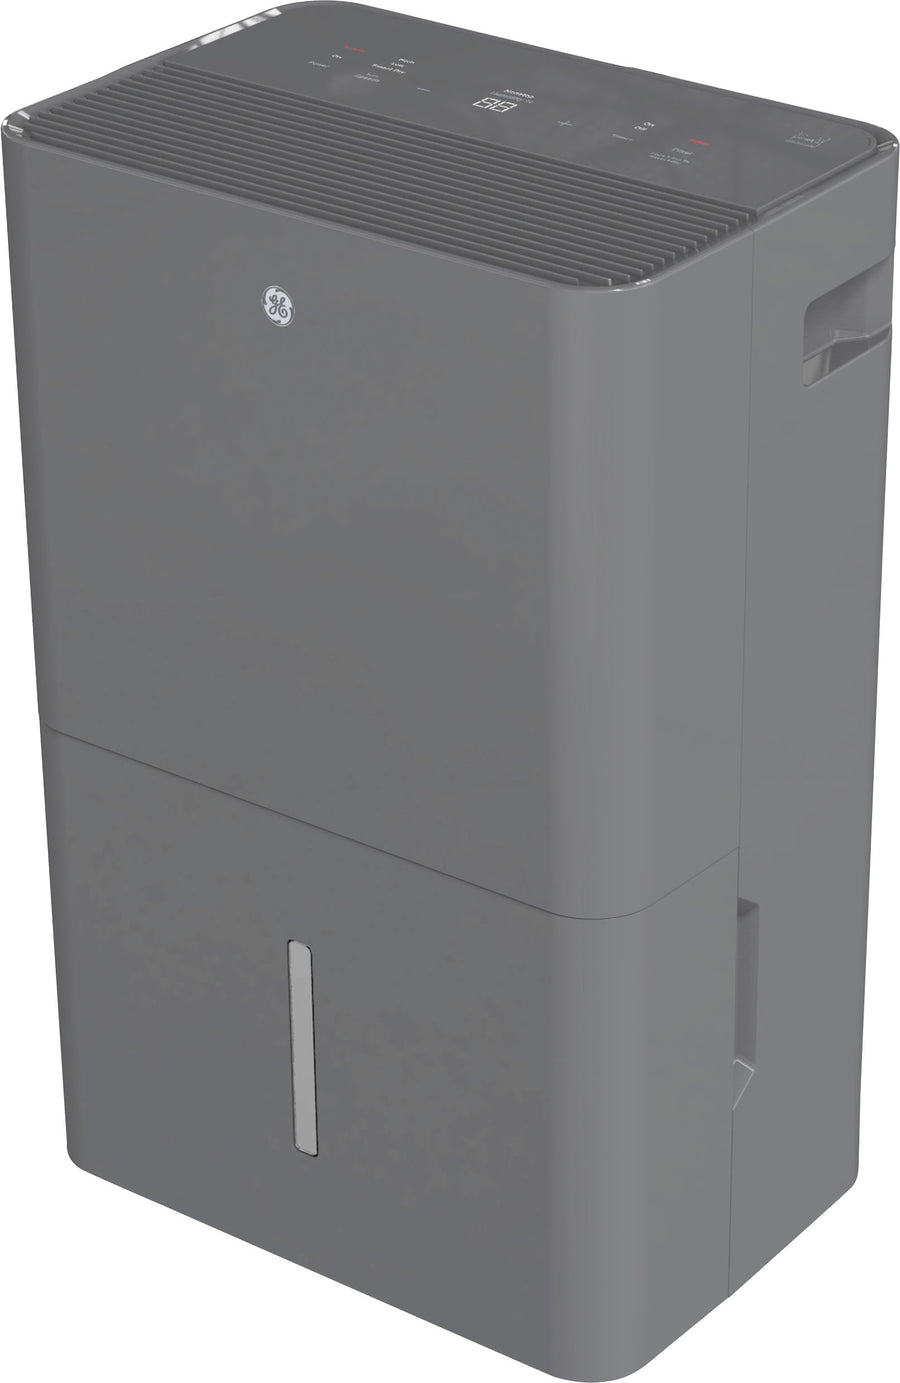 GE - 50-Pint Energy Star Portable Dehumidifier with Smart Dry for Wet Spaces - Grey_0